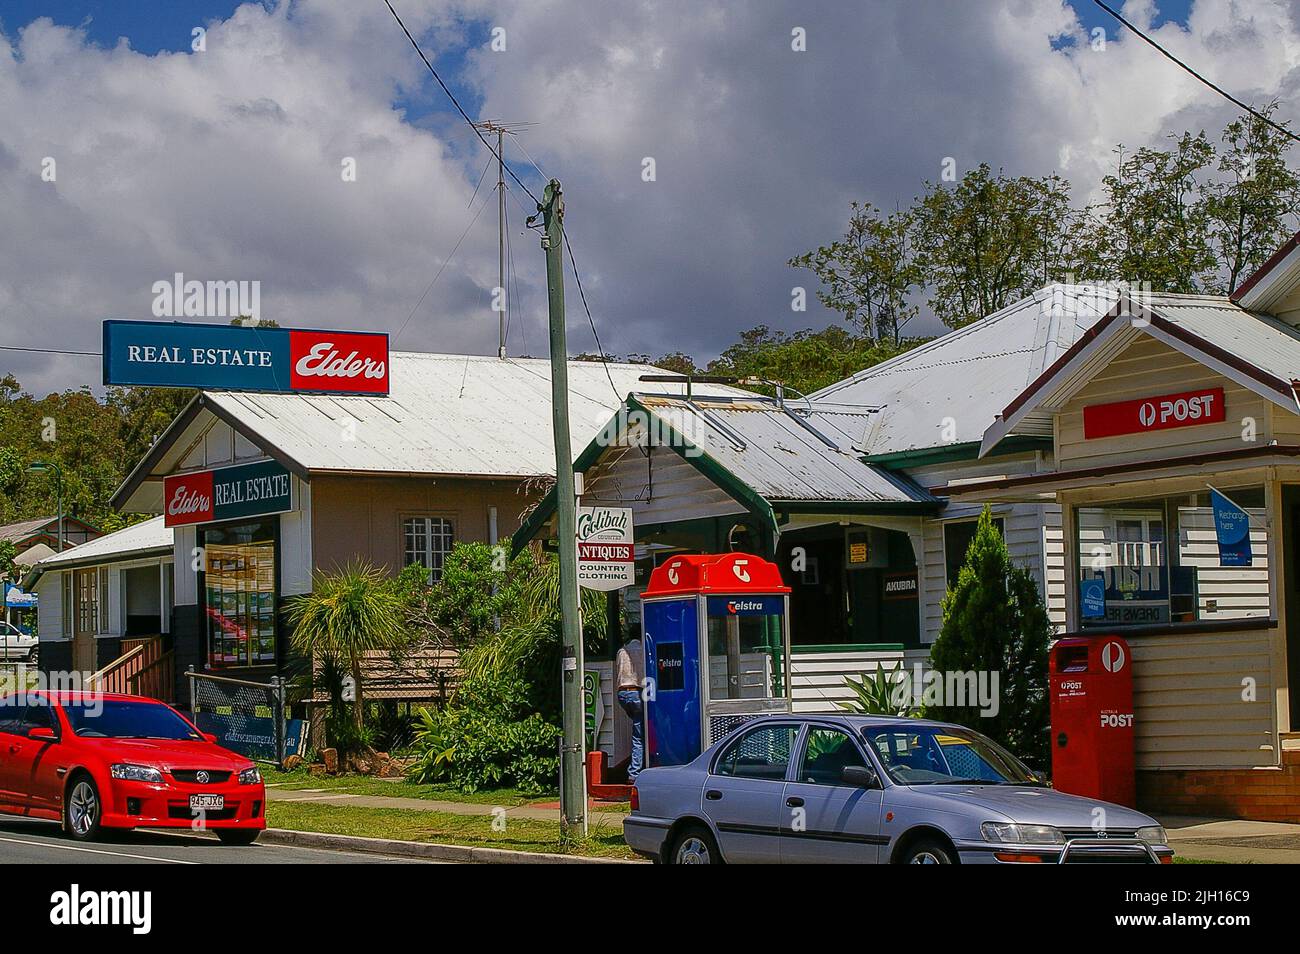 Main street of historic small town of Canungra, Queensland, Australia. Post office, phone box, estate agents, shops. Population 1300, plus tourists. Stock Photo